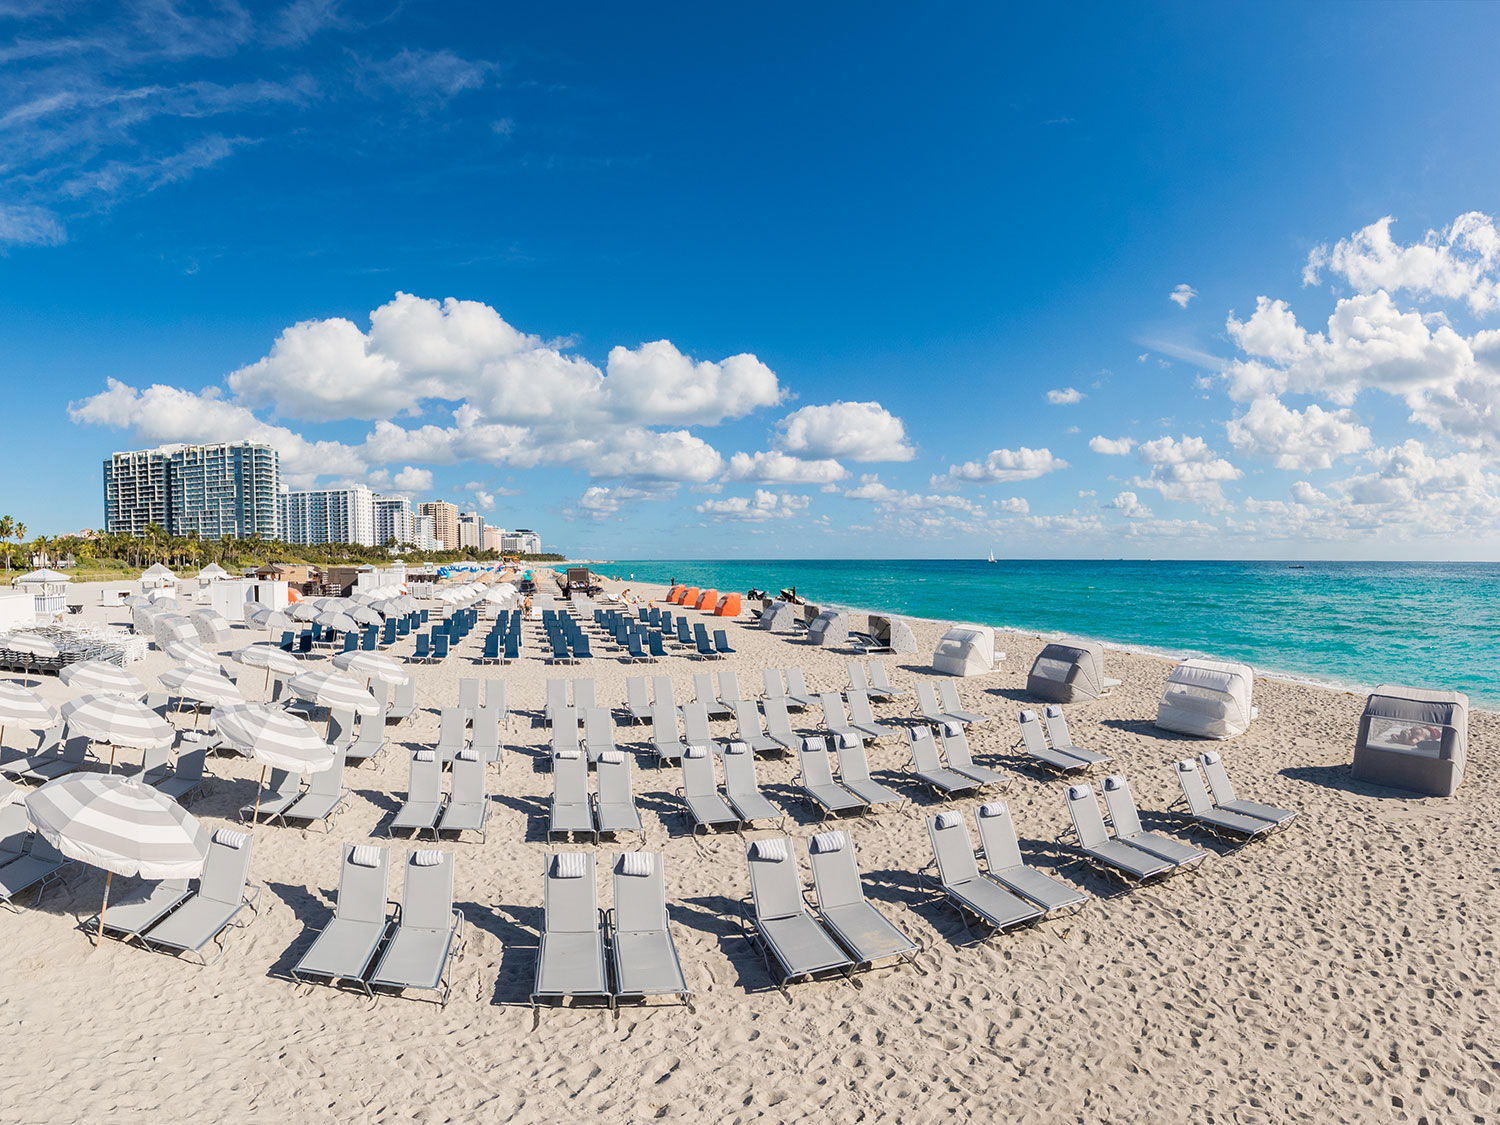 Lounge chairs lined up on the sand at The Shelbourne South Beach resort.